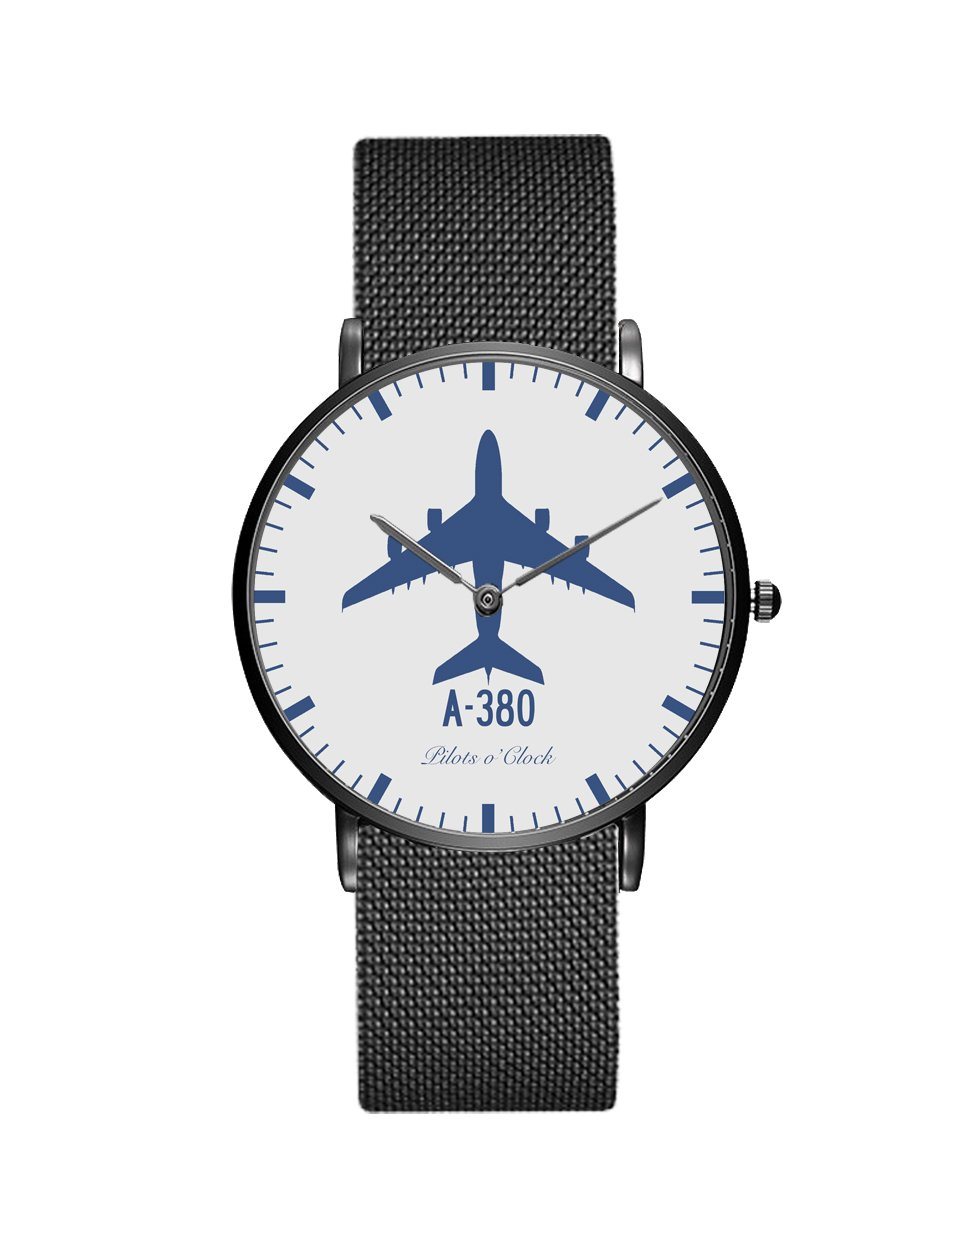 Airbus A380 Stainless Steel Strap Watches Pilot Eyes Store Black & Stainless Steel Strap 